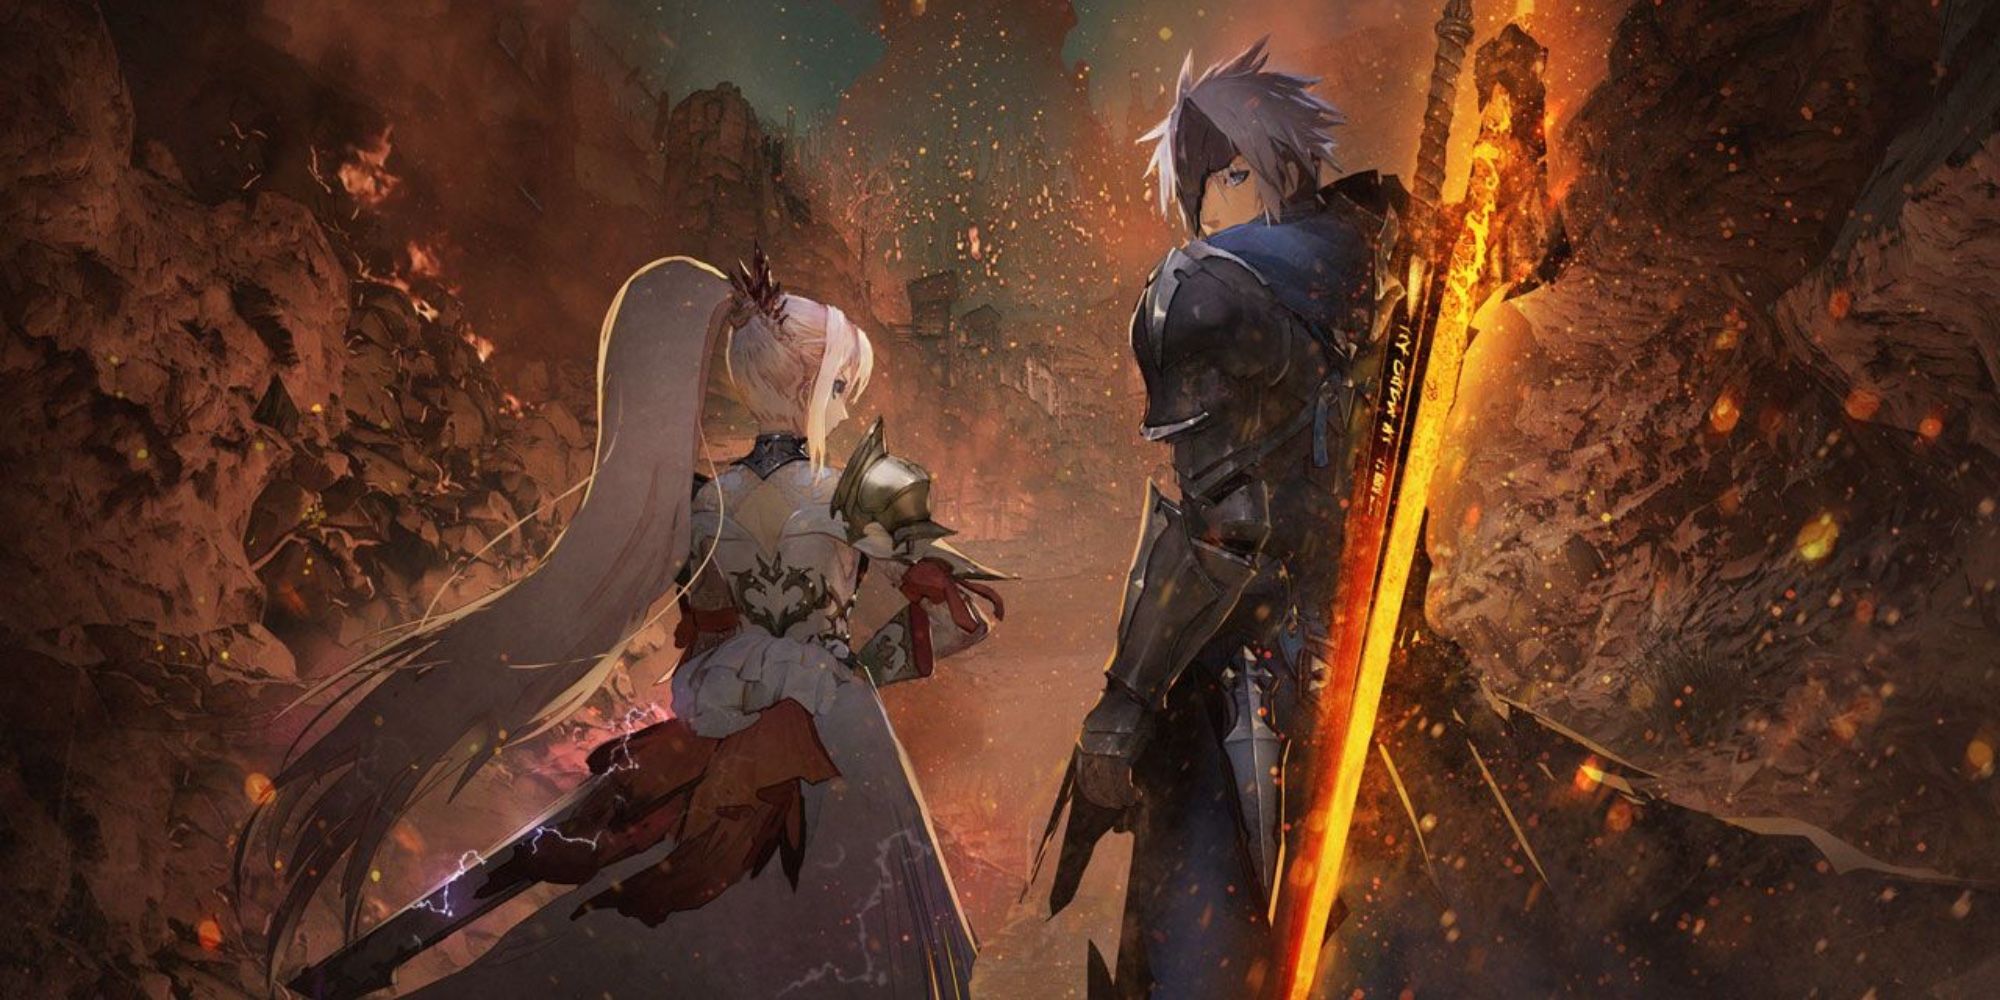 Tales of Arise characters Alphen and Shionne